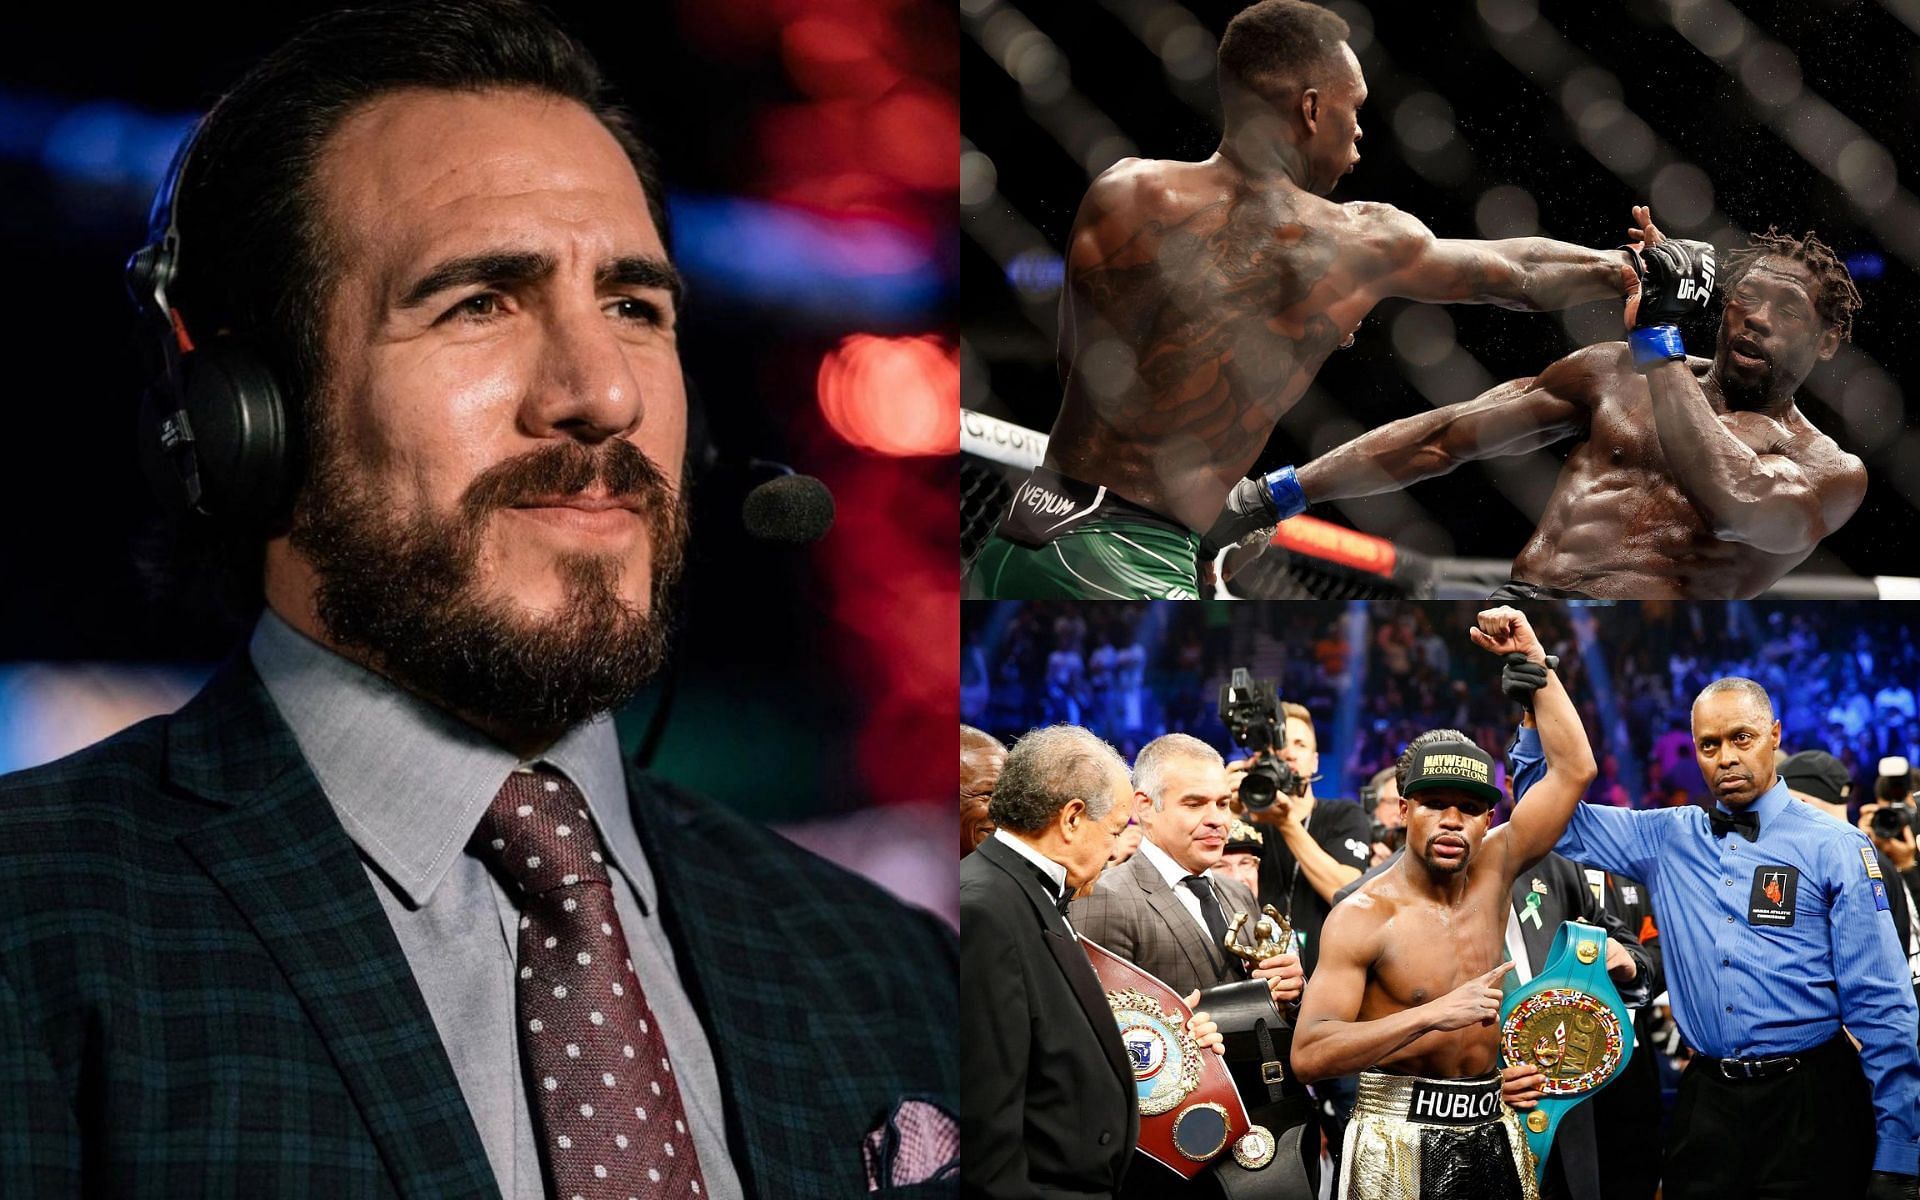 Kenny Florian (left), Israel Adesanya vs. Jared Cannonier (top right), and Floyd Mayweather (bottom right) [Images courtesy of @kennyflorian Instagram and Getty]